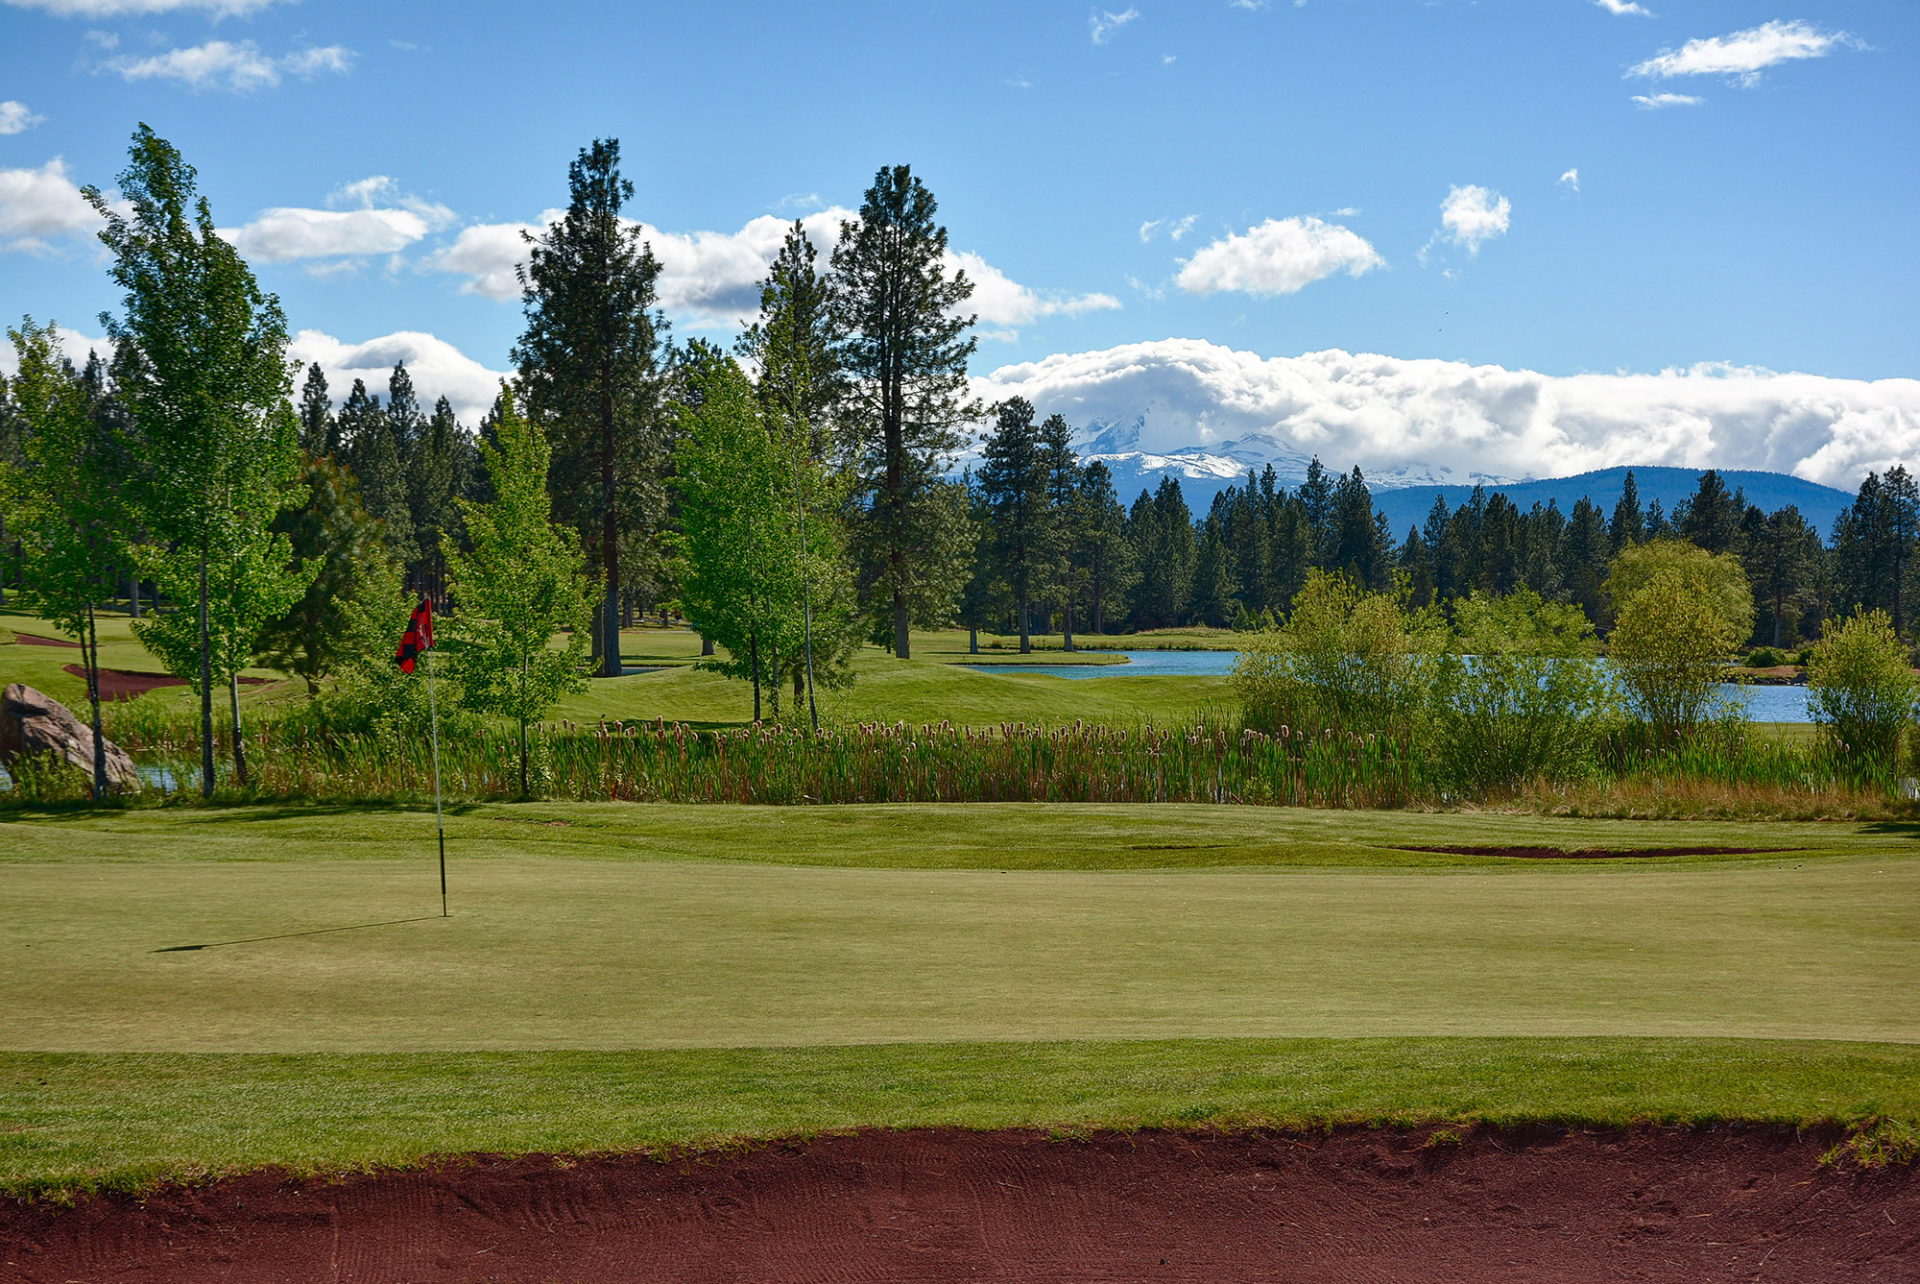 best golf courses in oregon: Aspen Lakes hole 12 in Sisters, Oregon